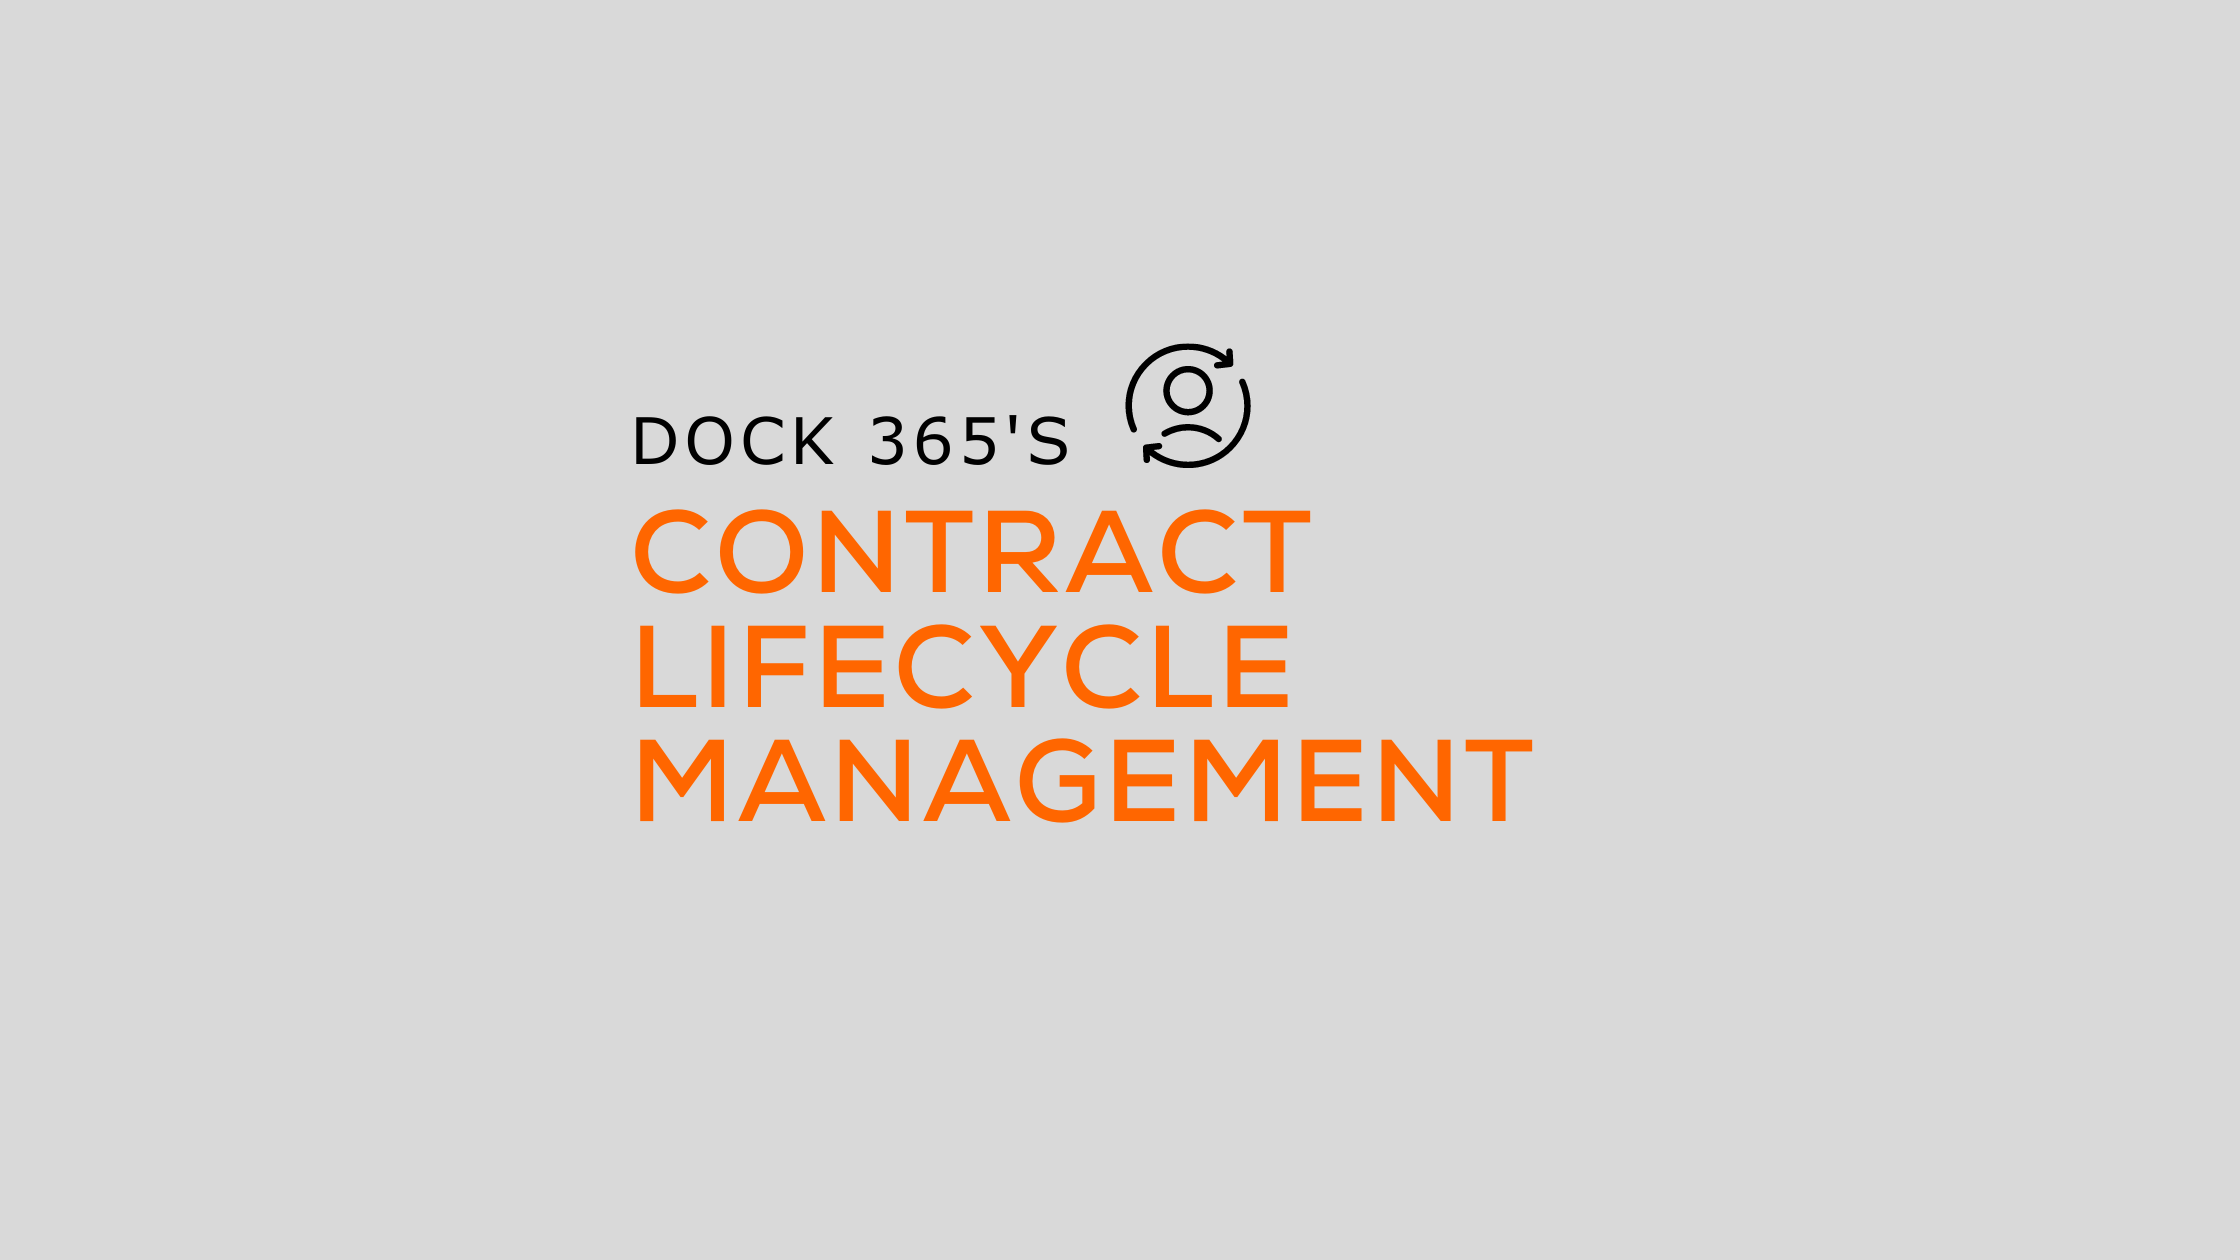 The Steps of The Contract Lifecycle Management Process